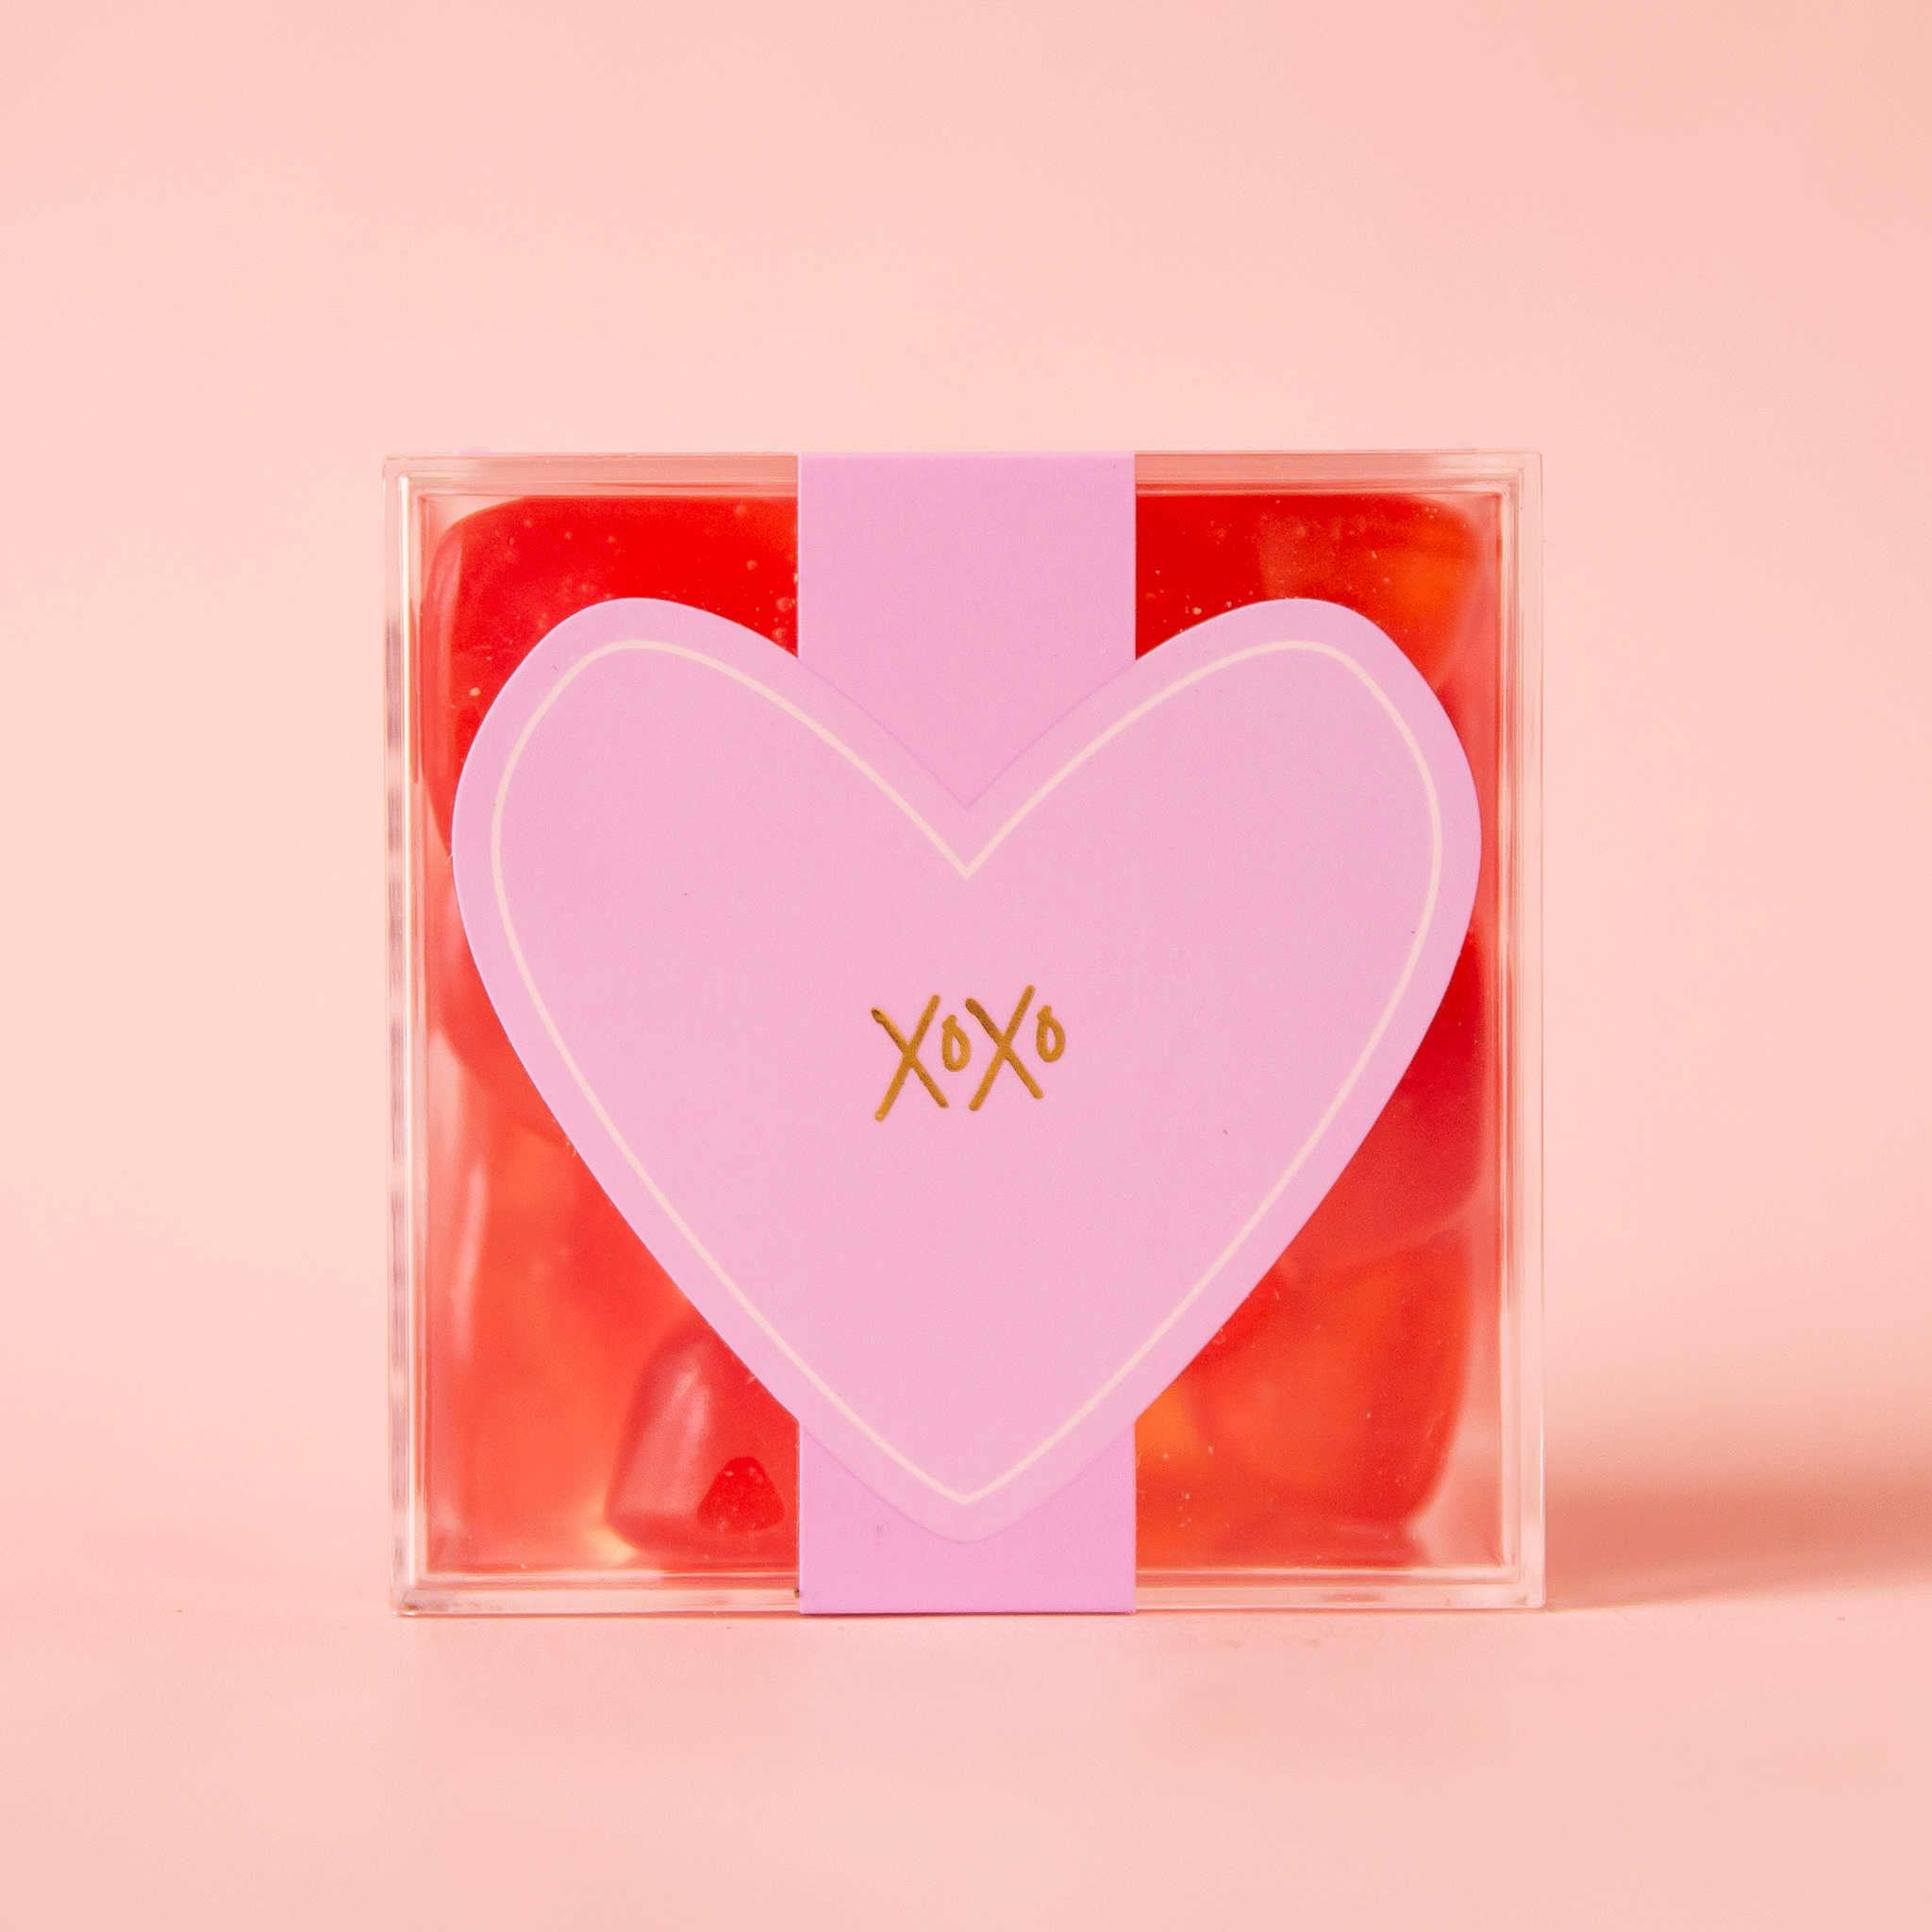 On a pink background is an acrylic clear box of red heart shaped gummy candies.